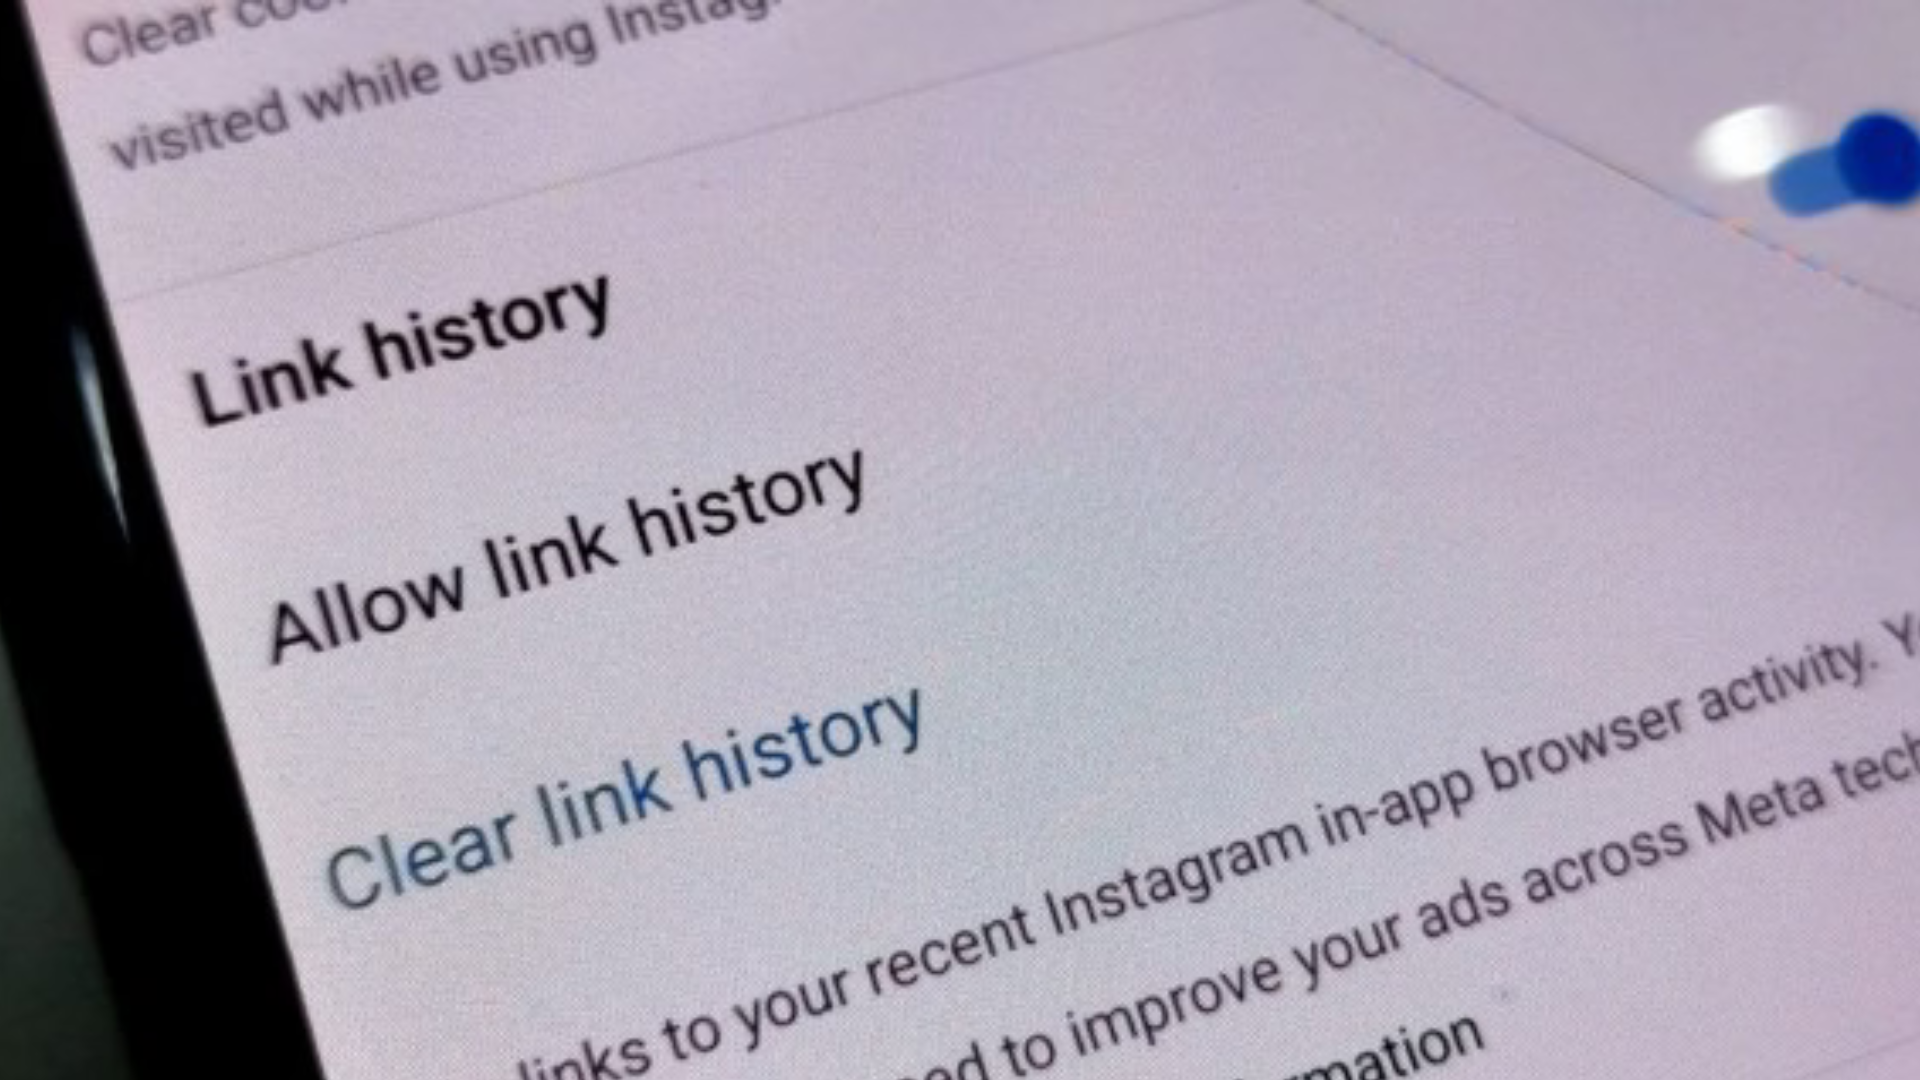 Meta's Link History feature: How to disable and opt-out